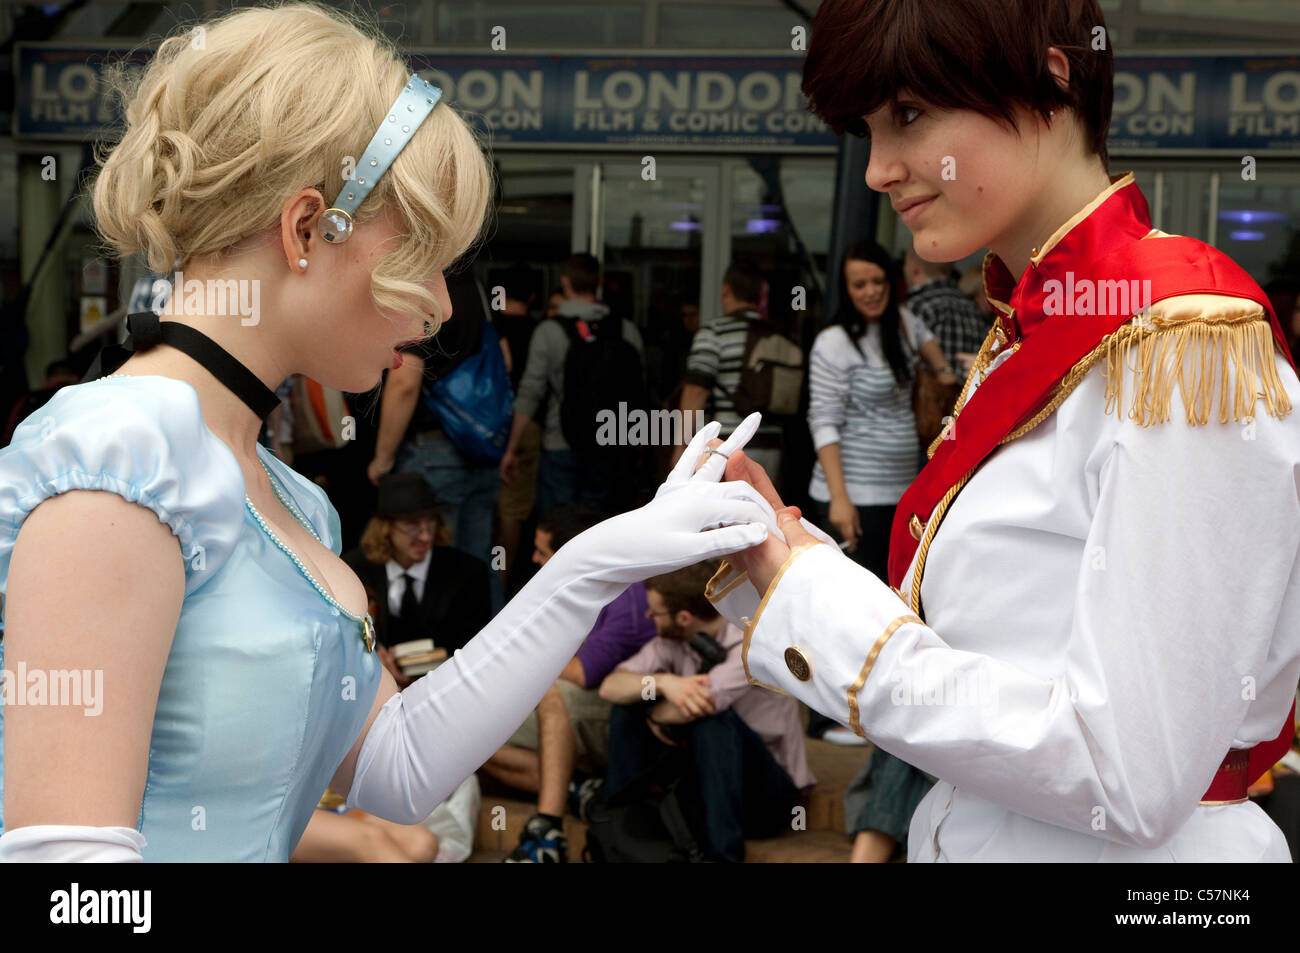 London Film & Comic Con 2011: Florence Roseberry-Haynes as Cinderella and Olivia Braddock as Prince Charming Disney characters Stock Photo